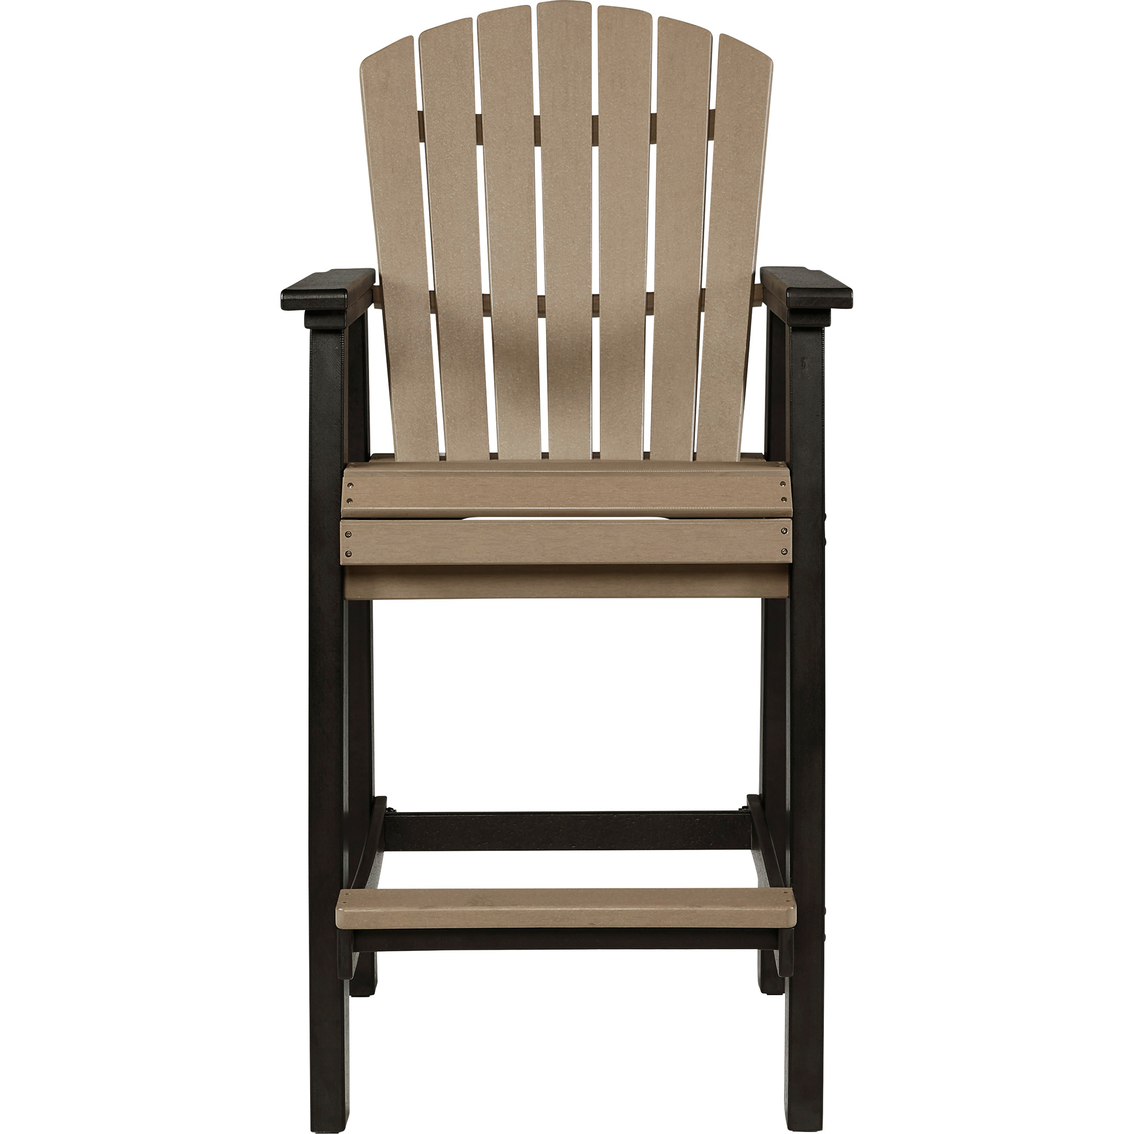 Signature Design by Ashley Fairen Trail Outdoor Barstool 2 pk. - Image 3 of 6